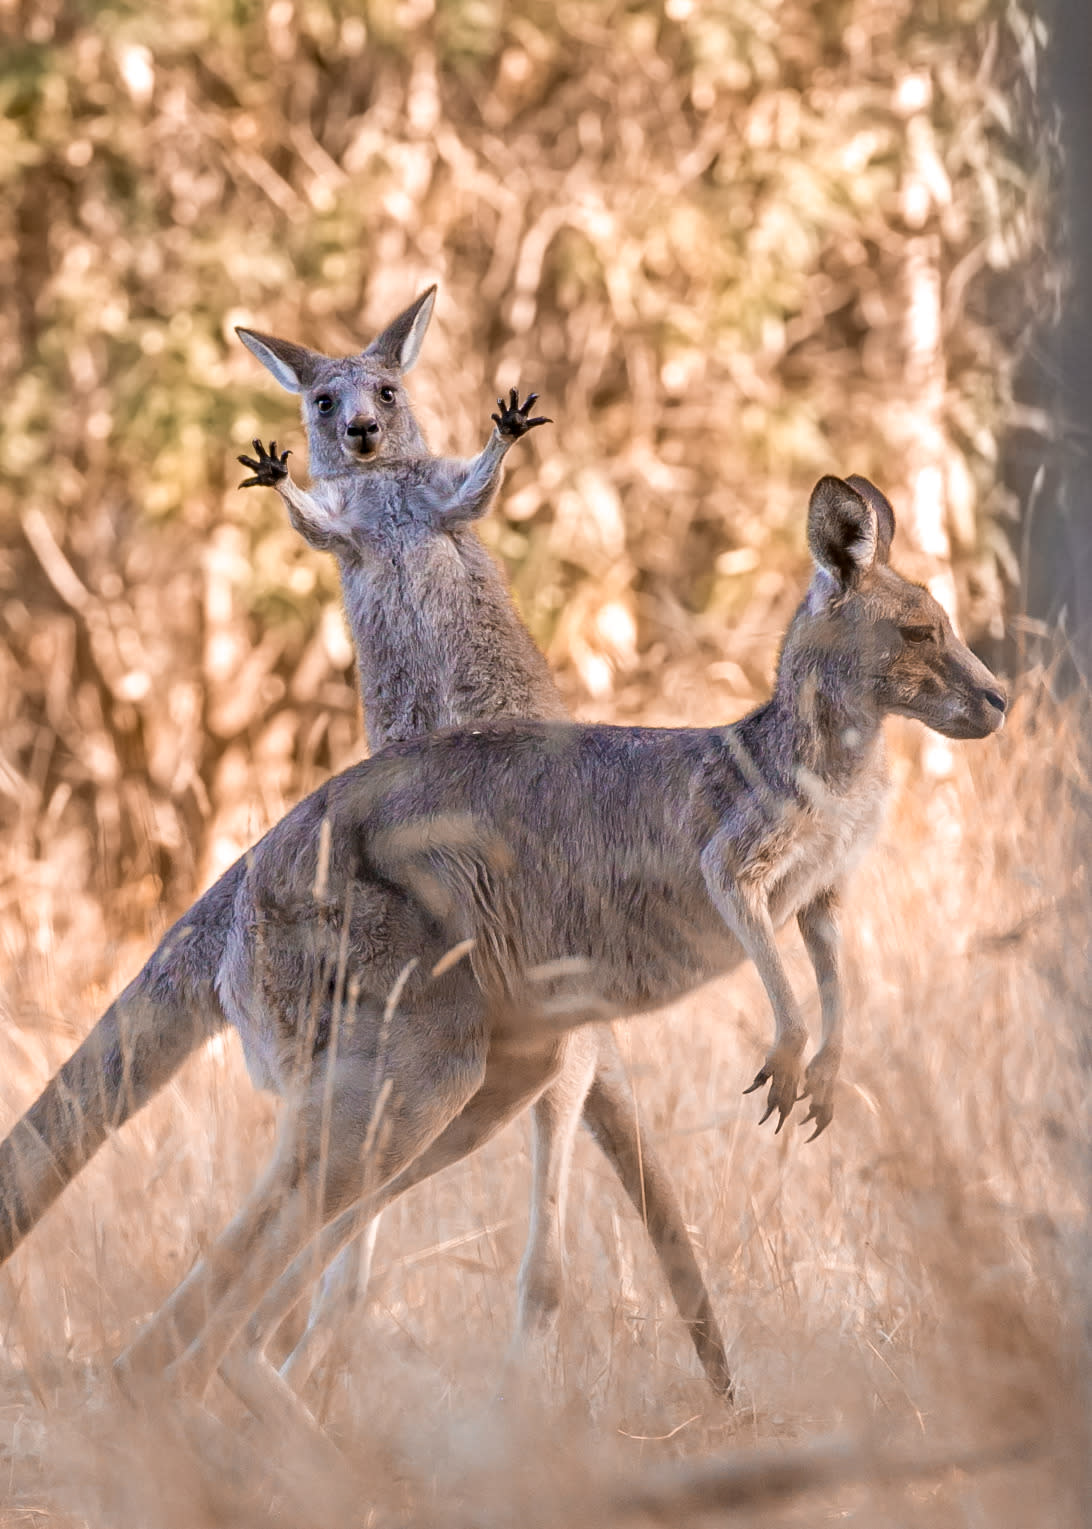 Boing: Taken at Westerfolds Park in Australia, a joey decides to get silly and try his hand at boxing. (Lara Mathews/Comedy Wildlife 2023)